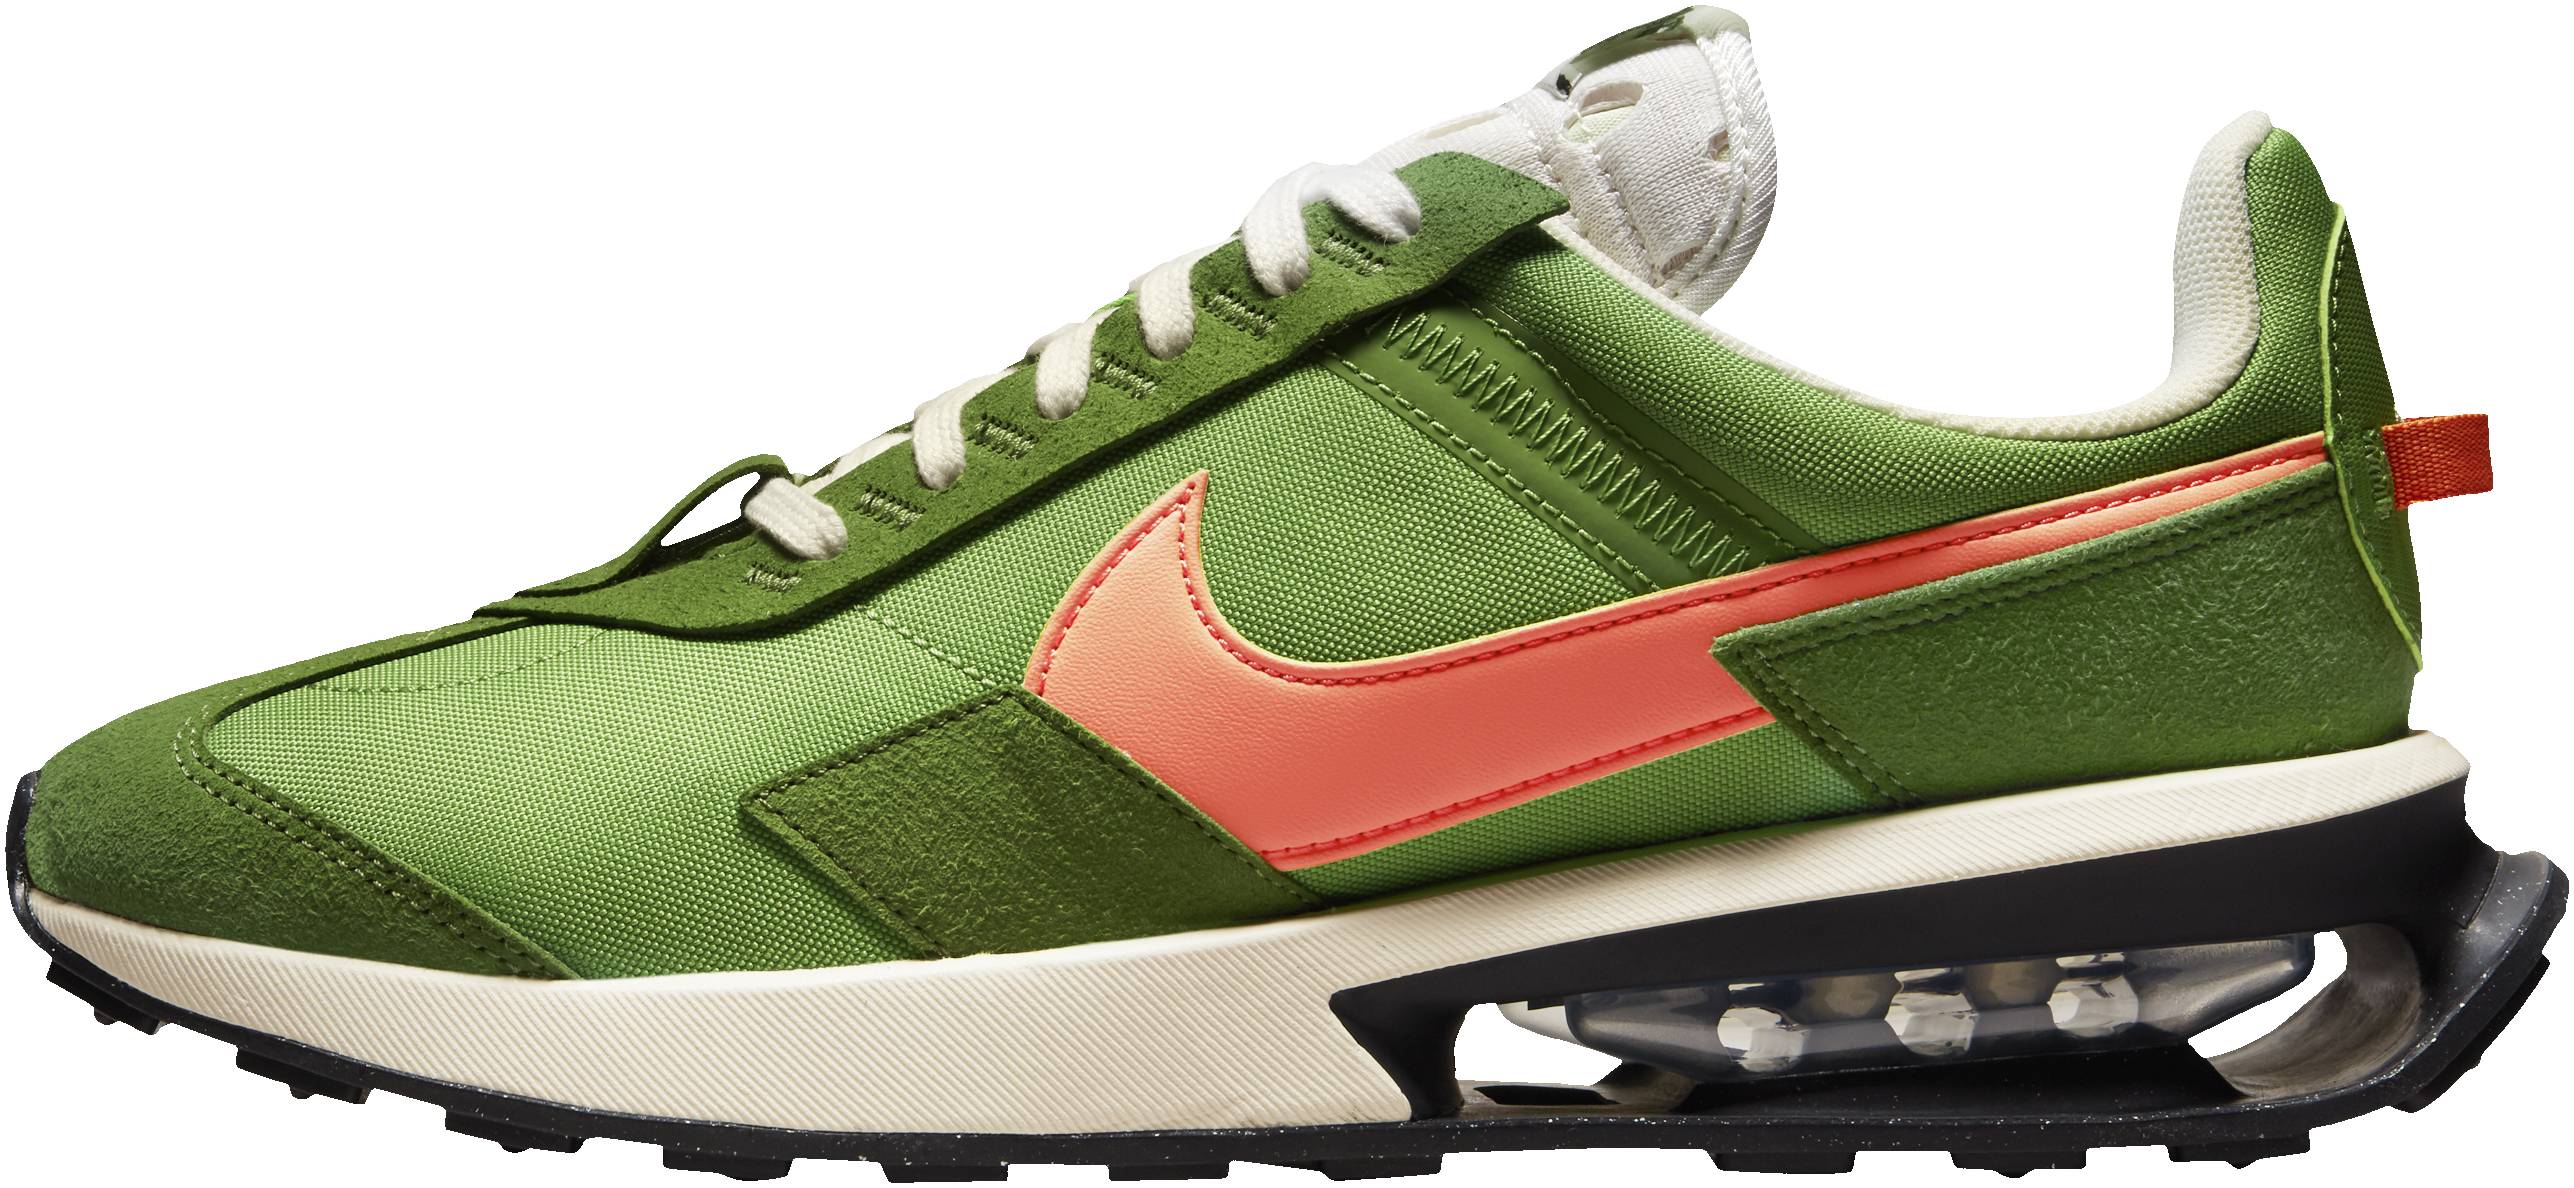 Nike Air Max Pre-Day LX sneakers in 4 colors (only $113) | RunRepeat